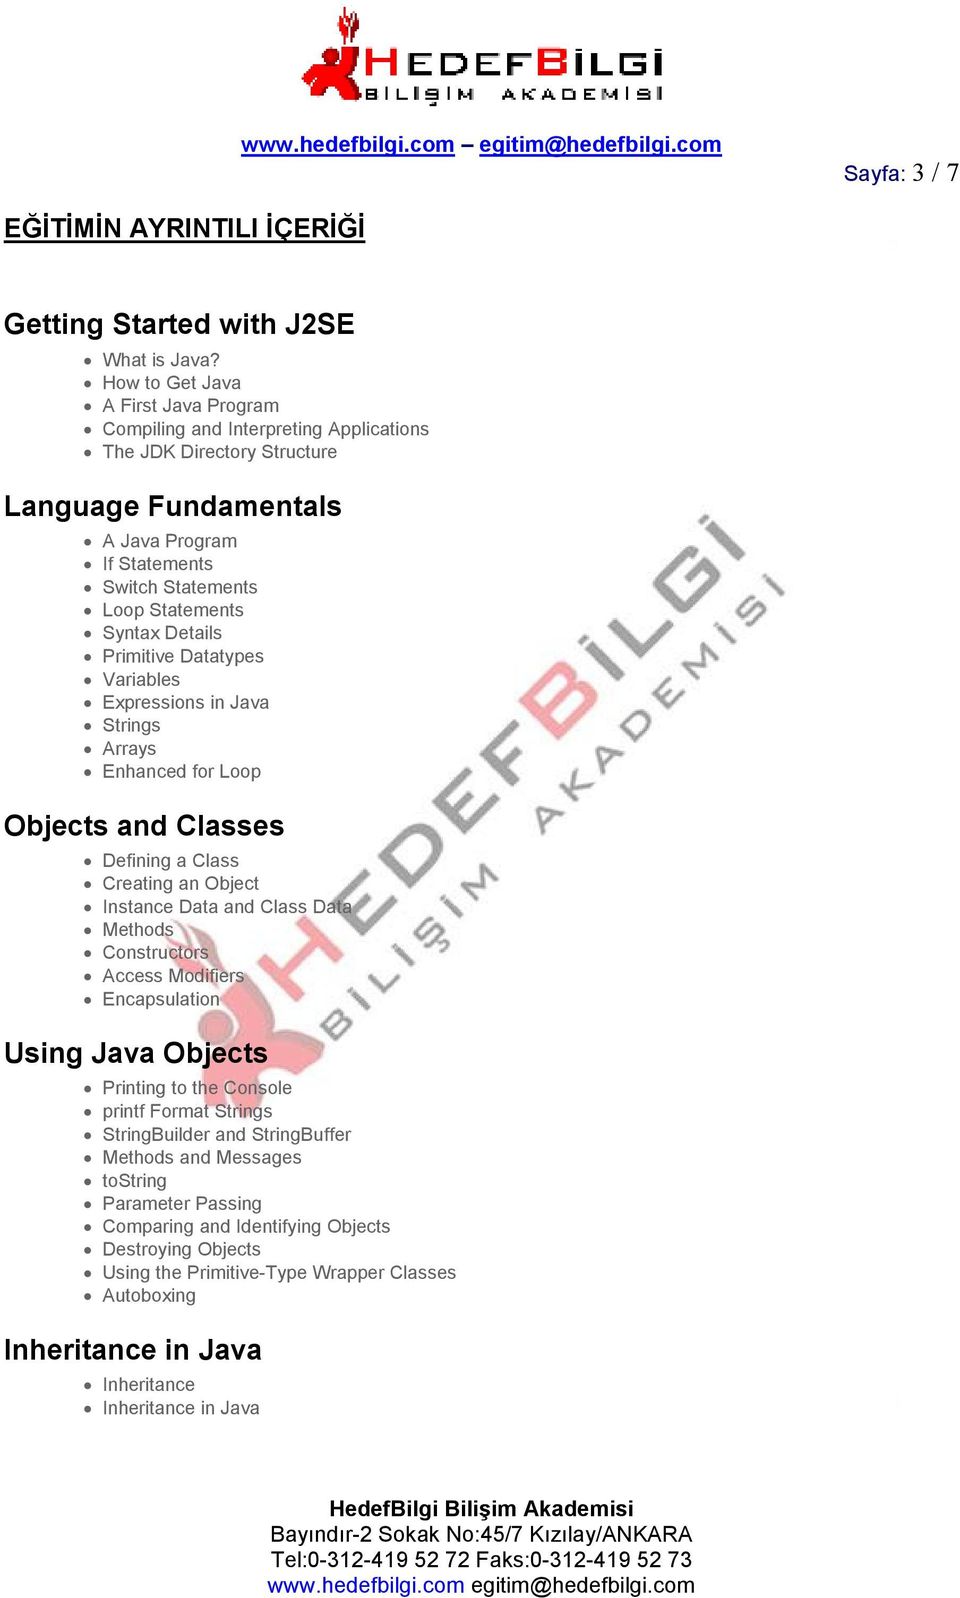 Details Primitive Datatypes Variables Expressions in Java Strings Arrays Enhanced for Loop Objects and Classes Defining a Class Creating an Object Instance Data and Class Data Methods Constructors